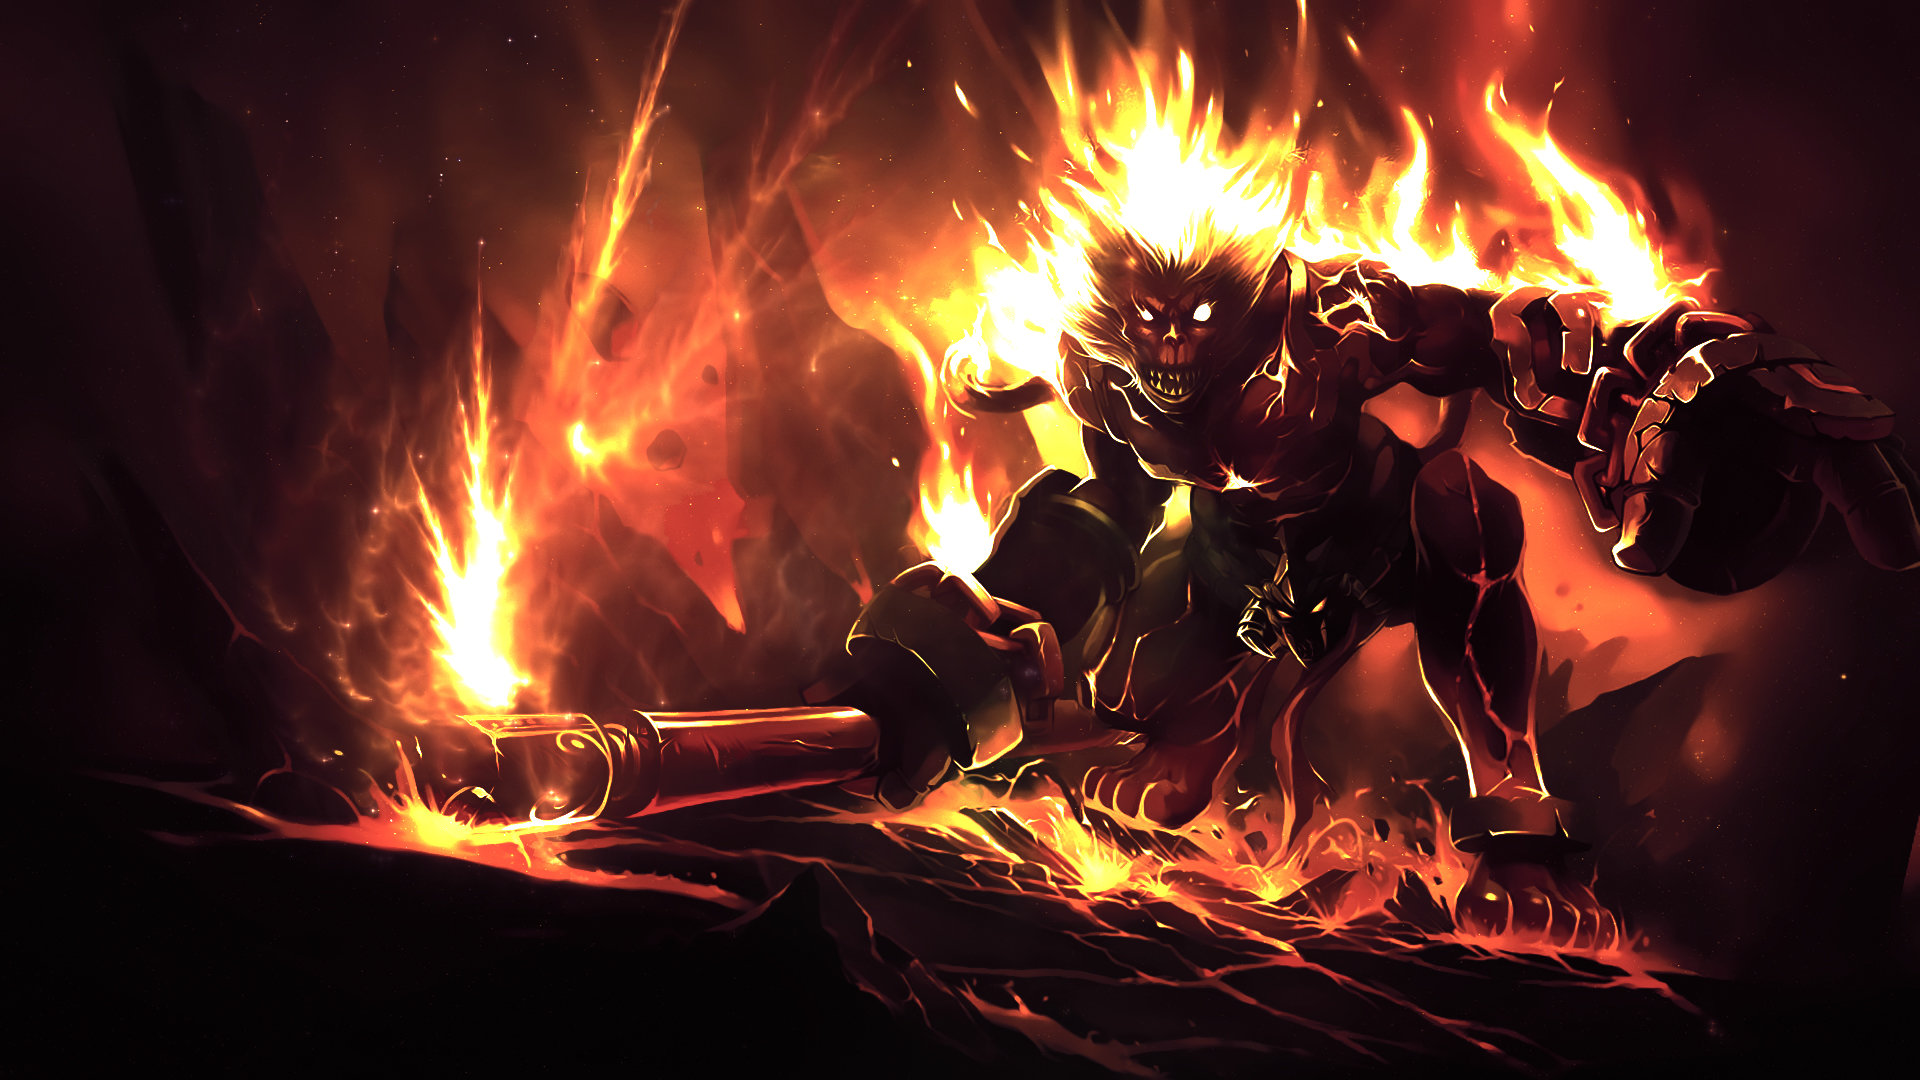 Download full hd 1080p Wukong (League Of Legends) PC background ID:171366 for free